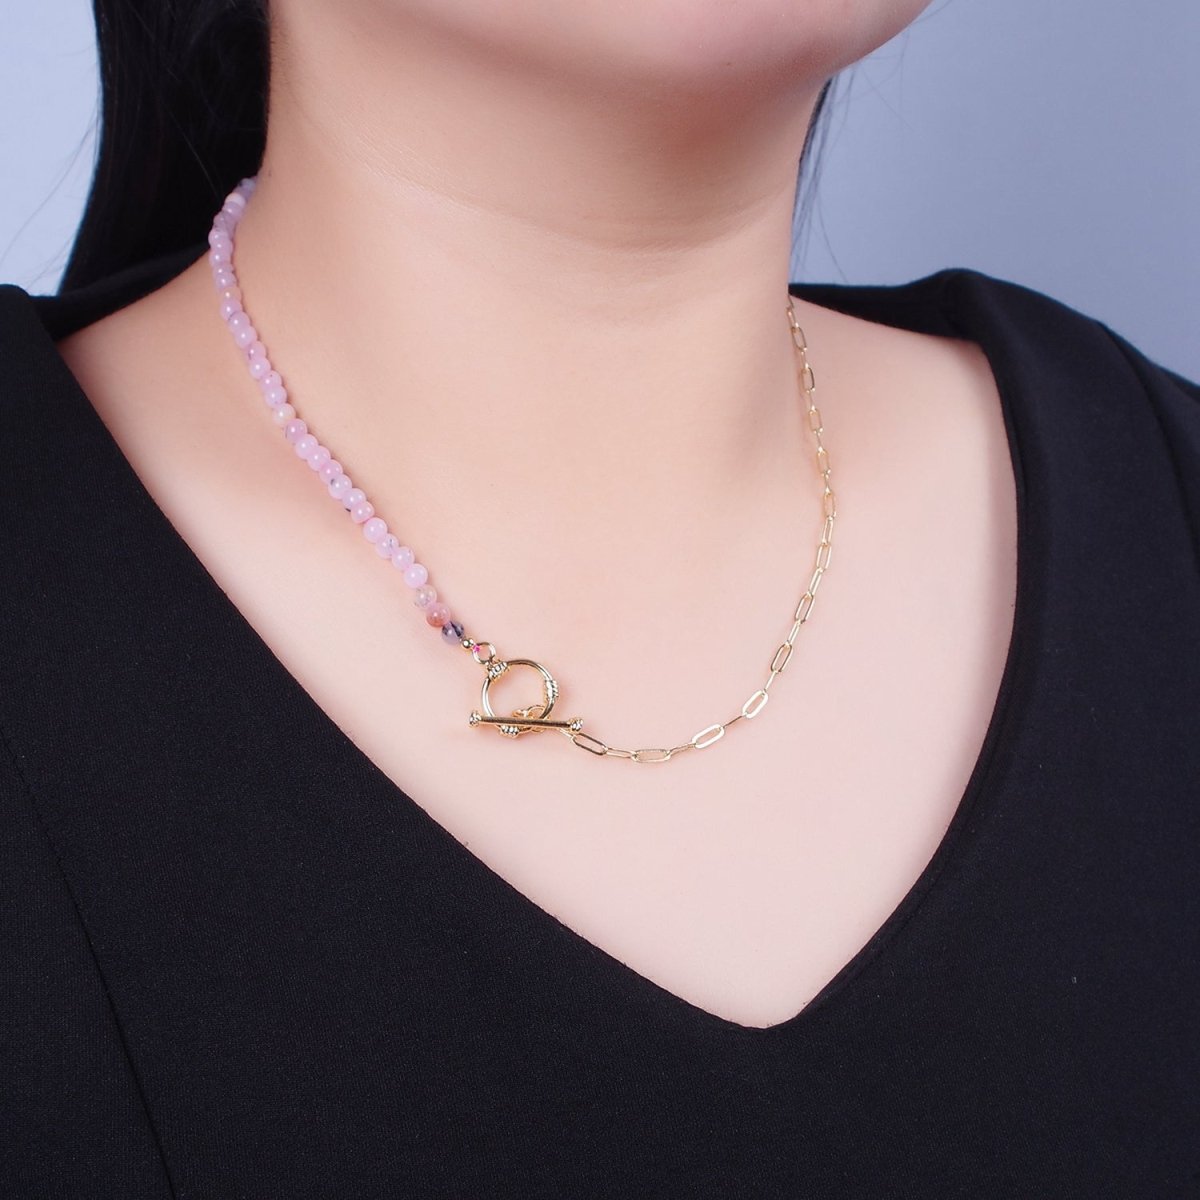 Dainty Half Bead Half Link Chain Necklace, 24k Gold Filled Paperclip Chain with Pink Jade Necklace Toggle Clasp | WA-971 Clearance Pricing - DLUXCA